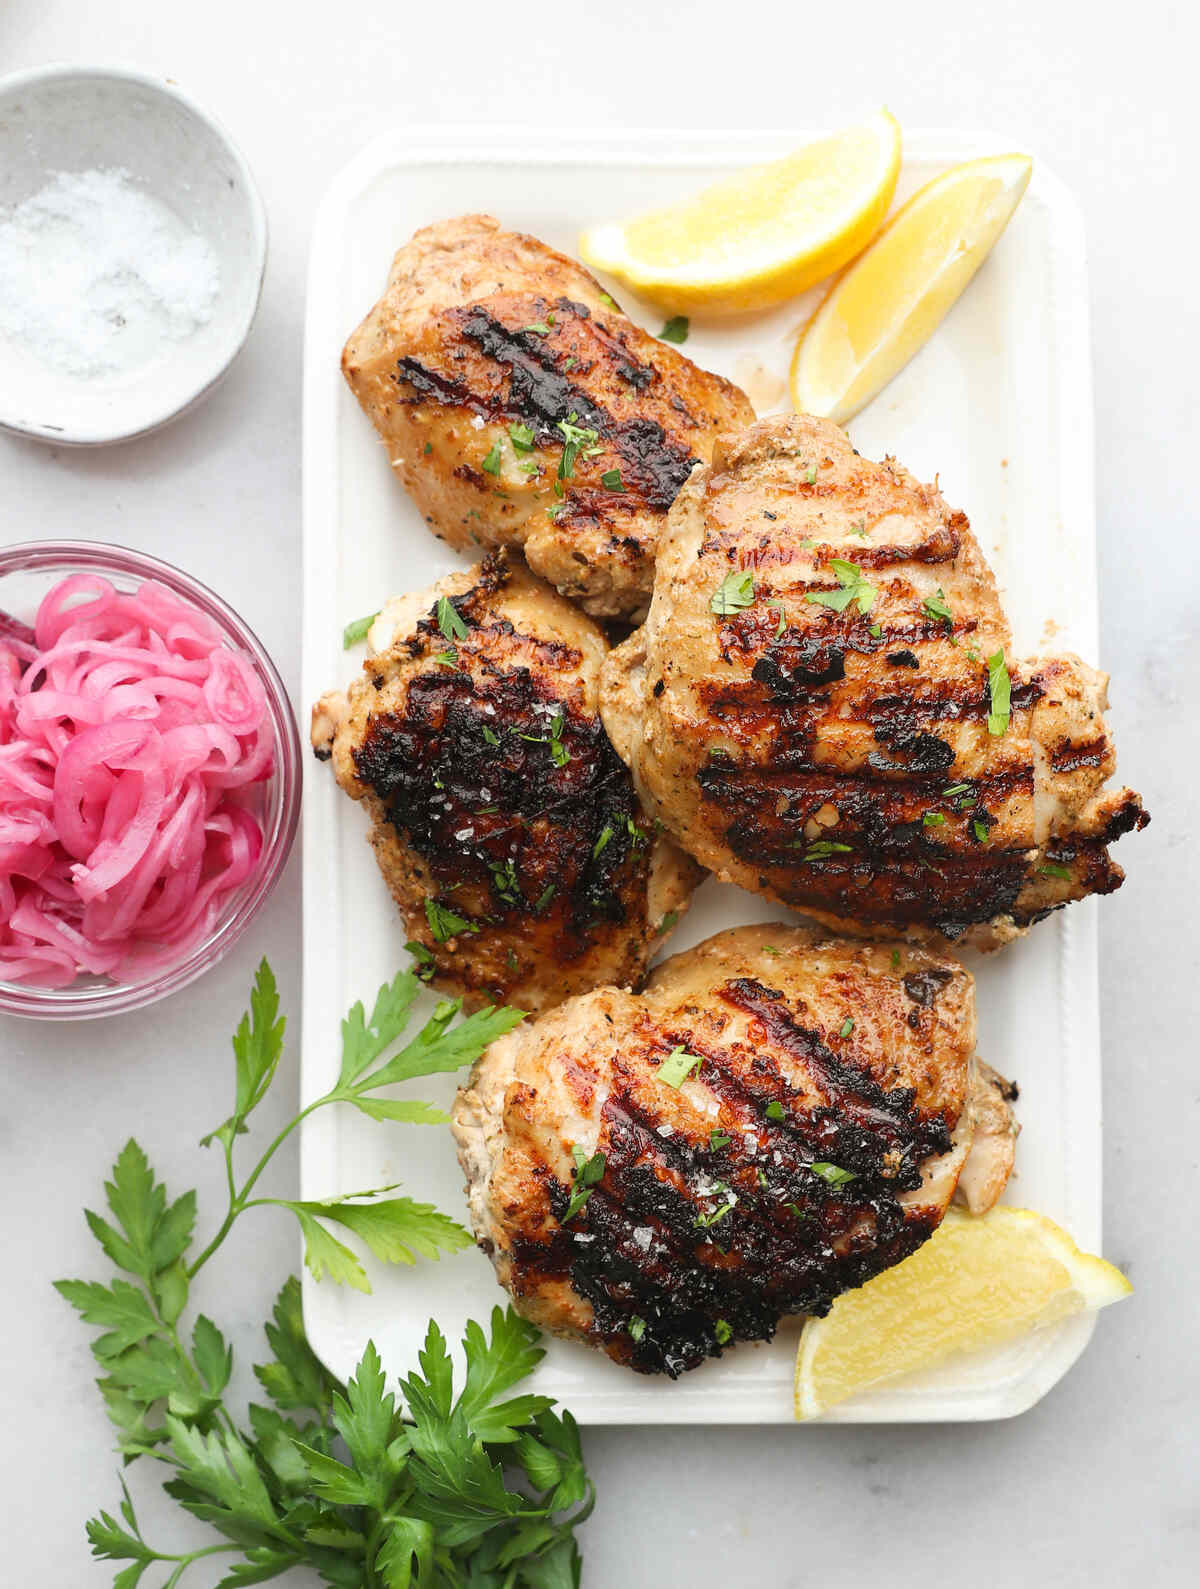 Greek marinated chicken with lemon and herbs on a white rectangular plate.